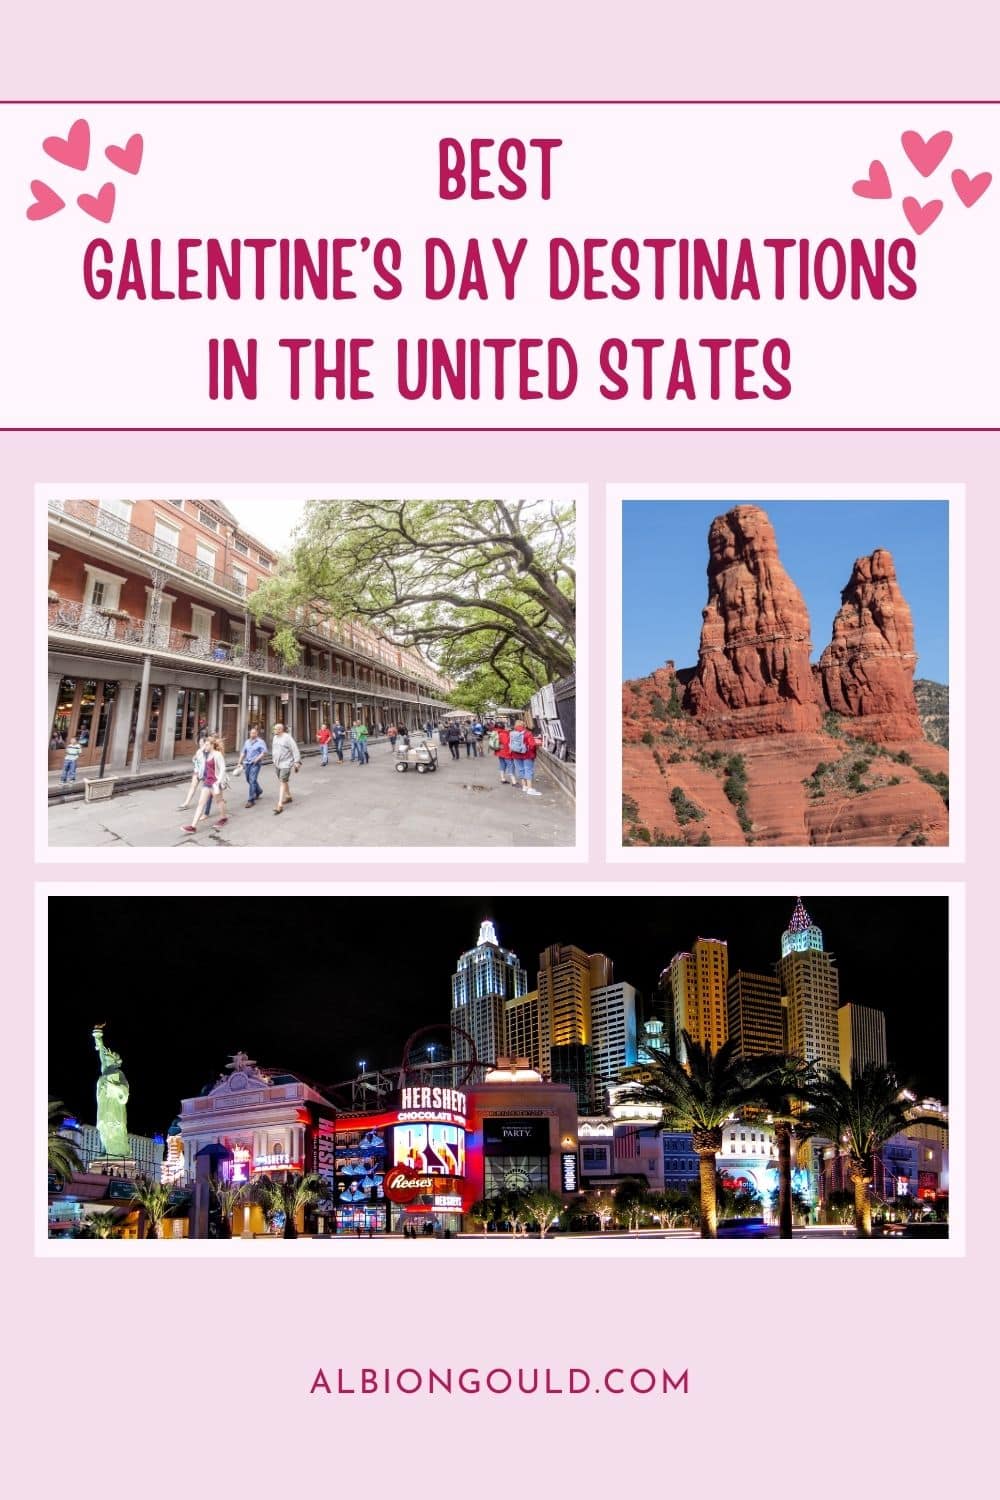 Best Galentine’s Destinations in the US